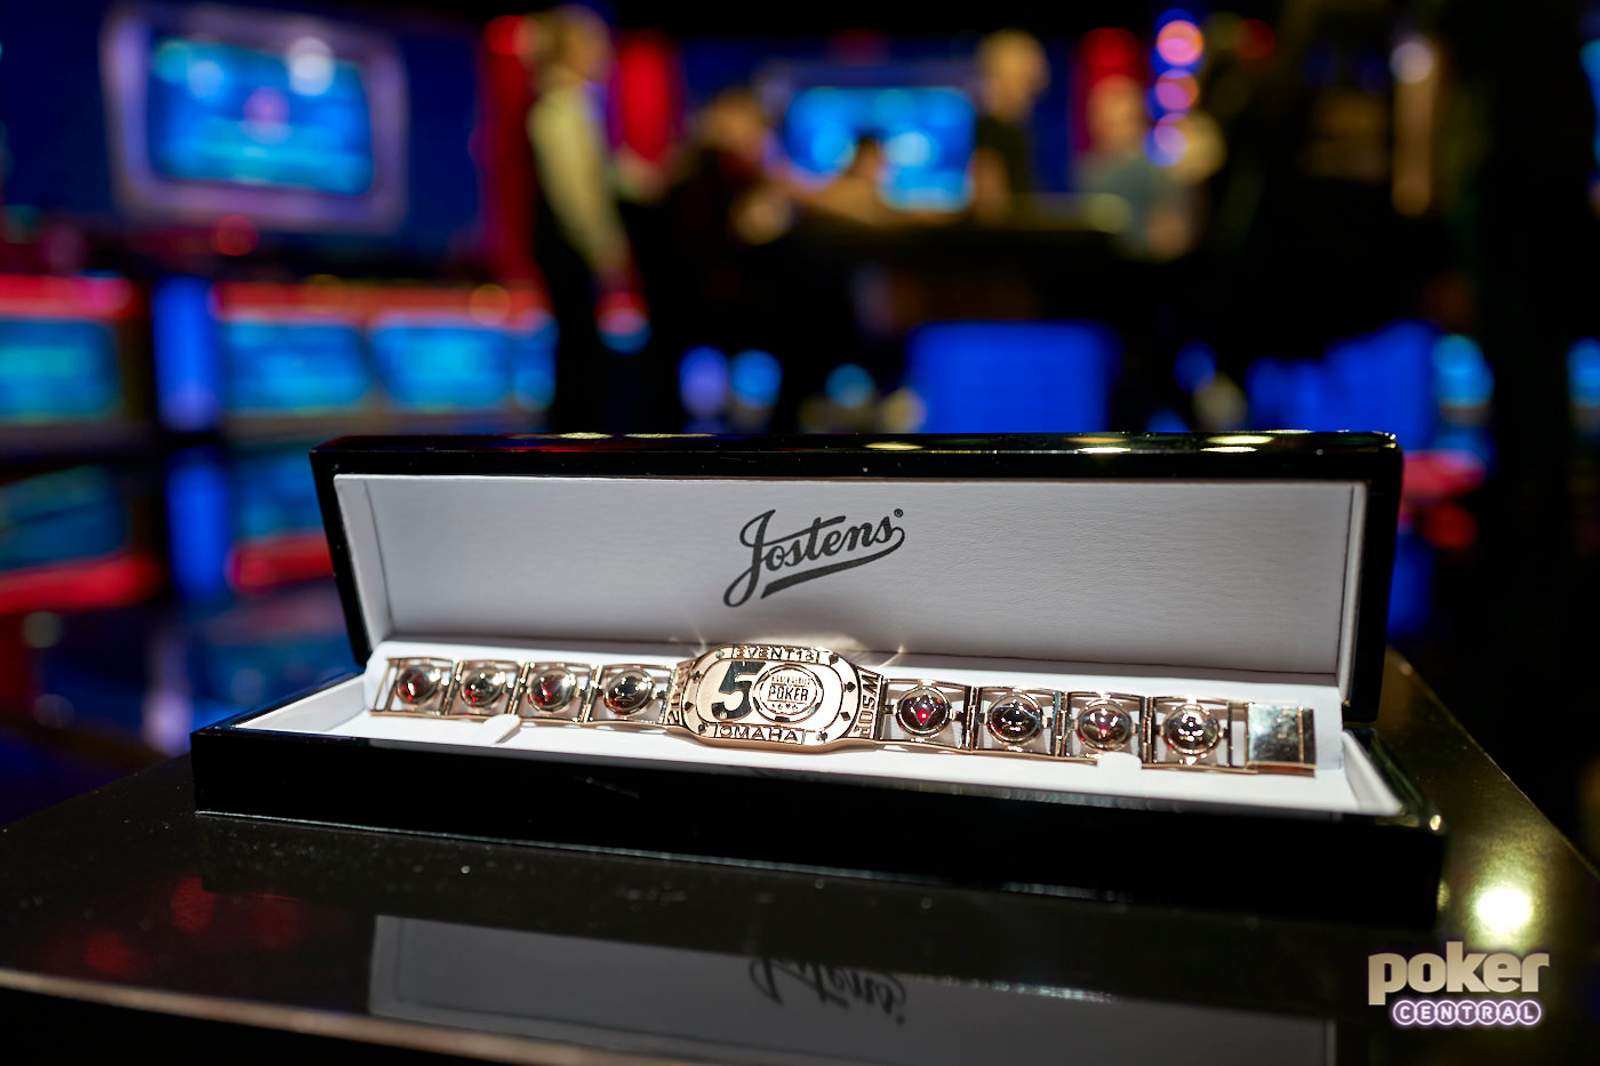 World Series of Poker Adds $50,000 High Roller Bracelet Event to its Schedule